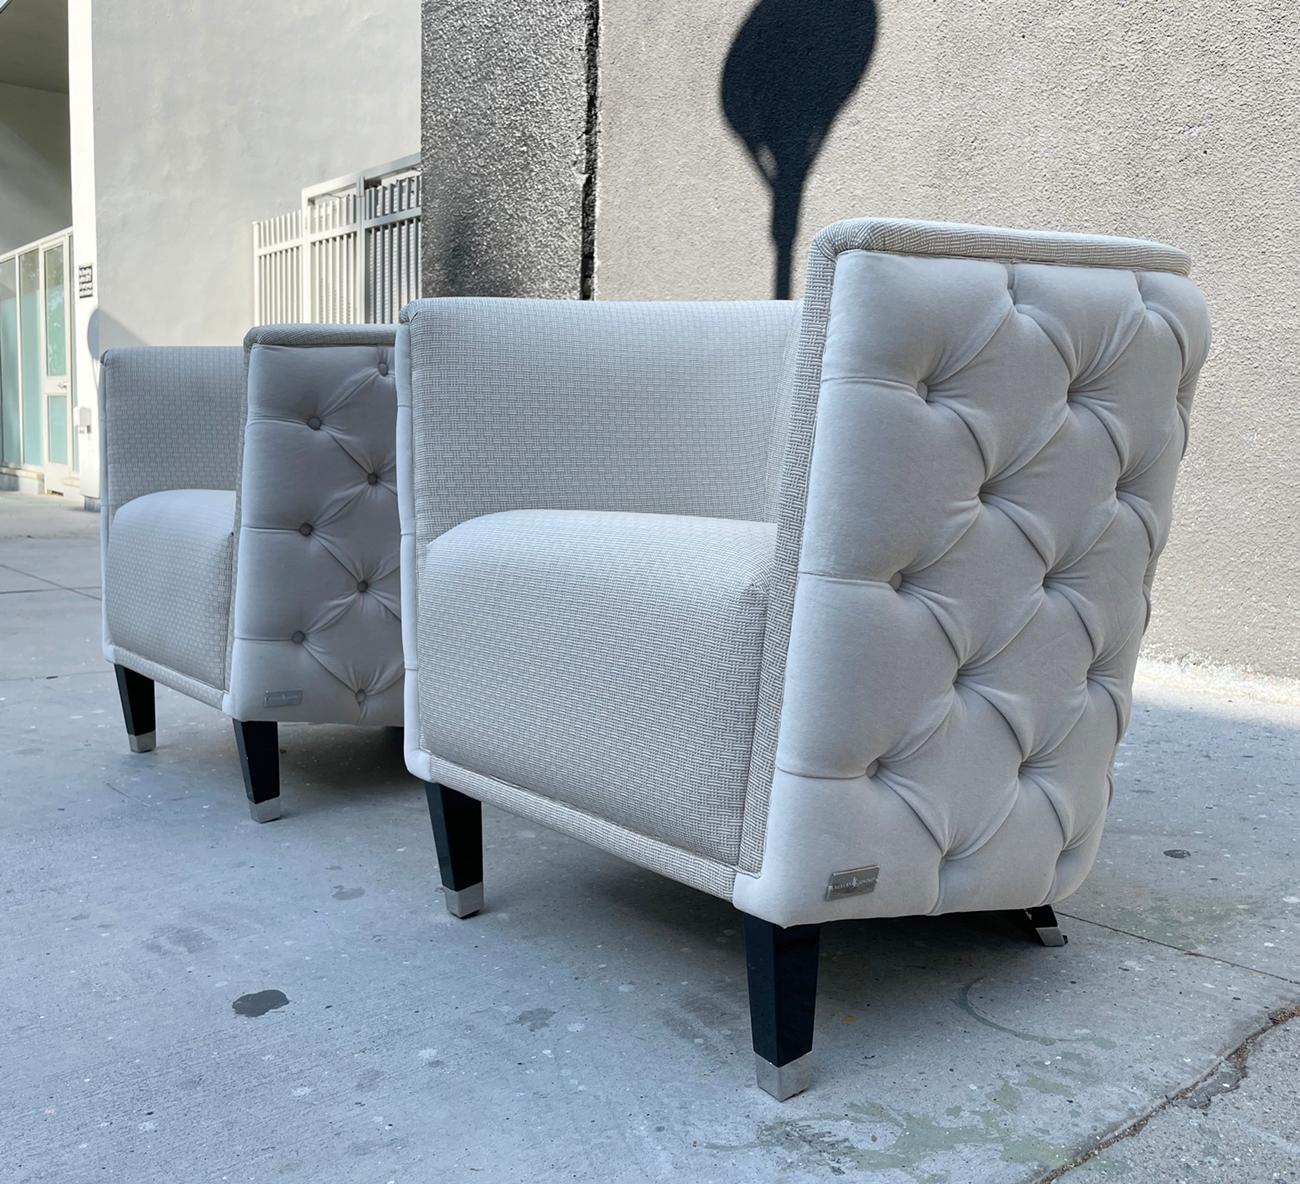 American Pair of Lounge Chairs with Tufted Backs by Luxury Living For Sale